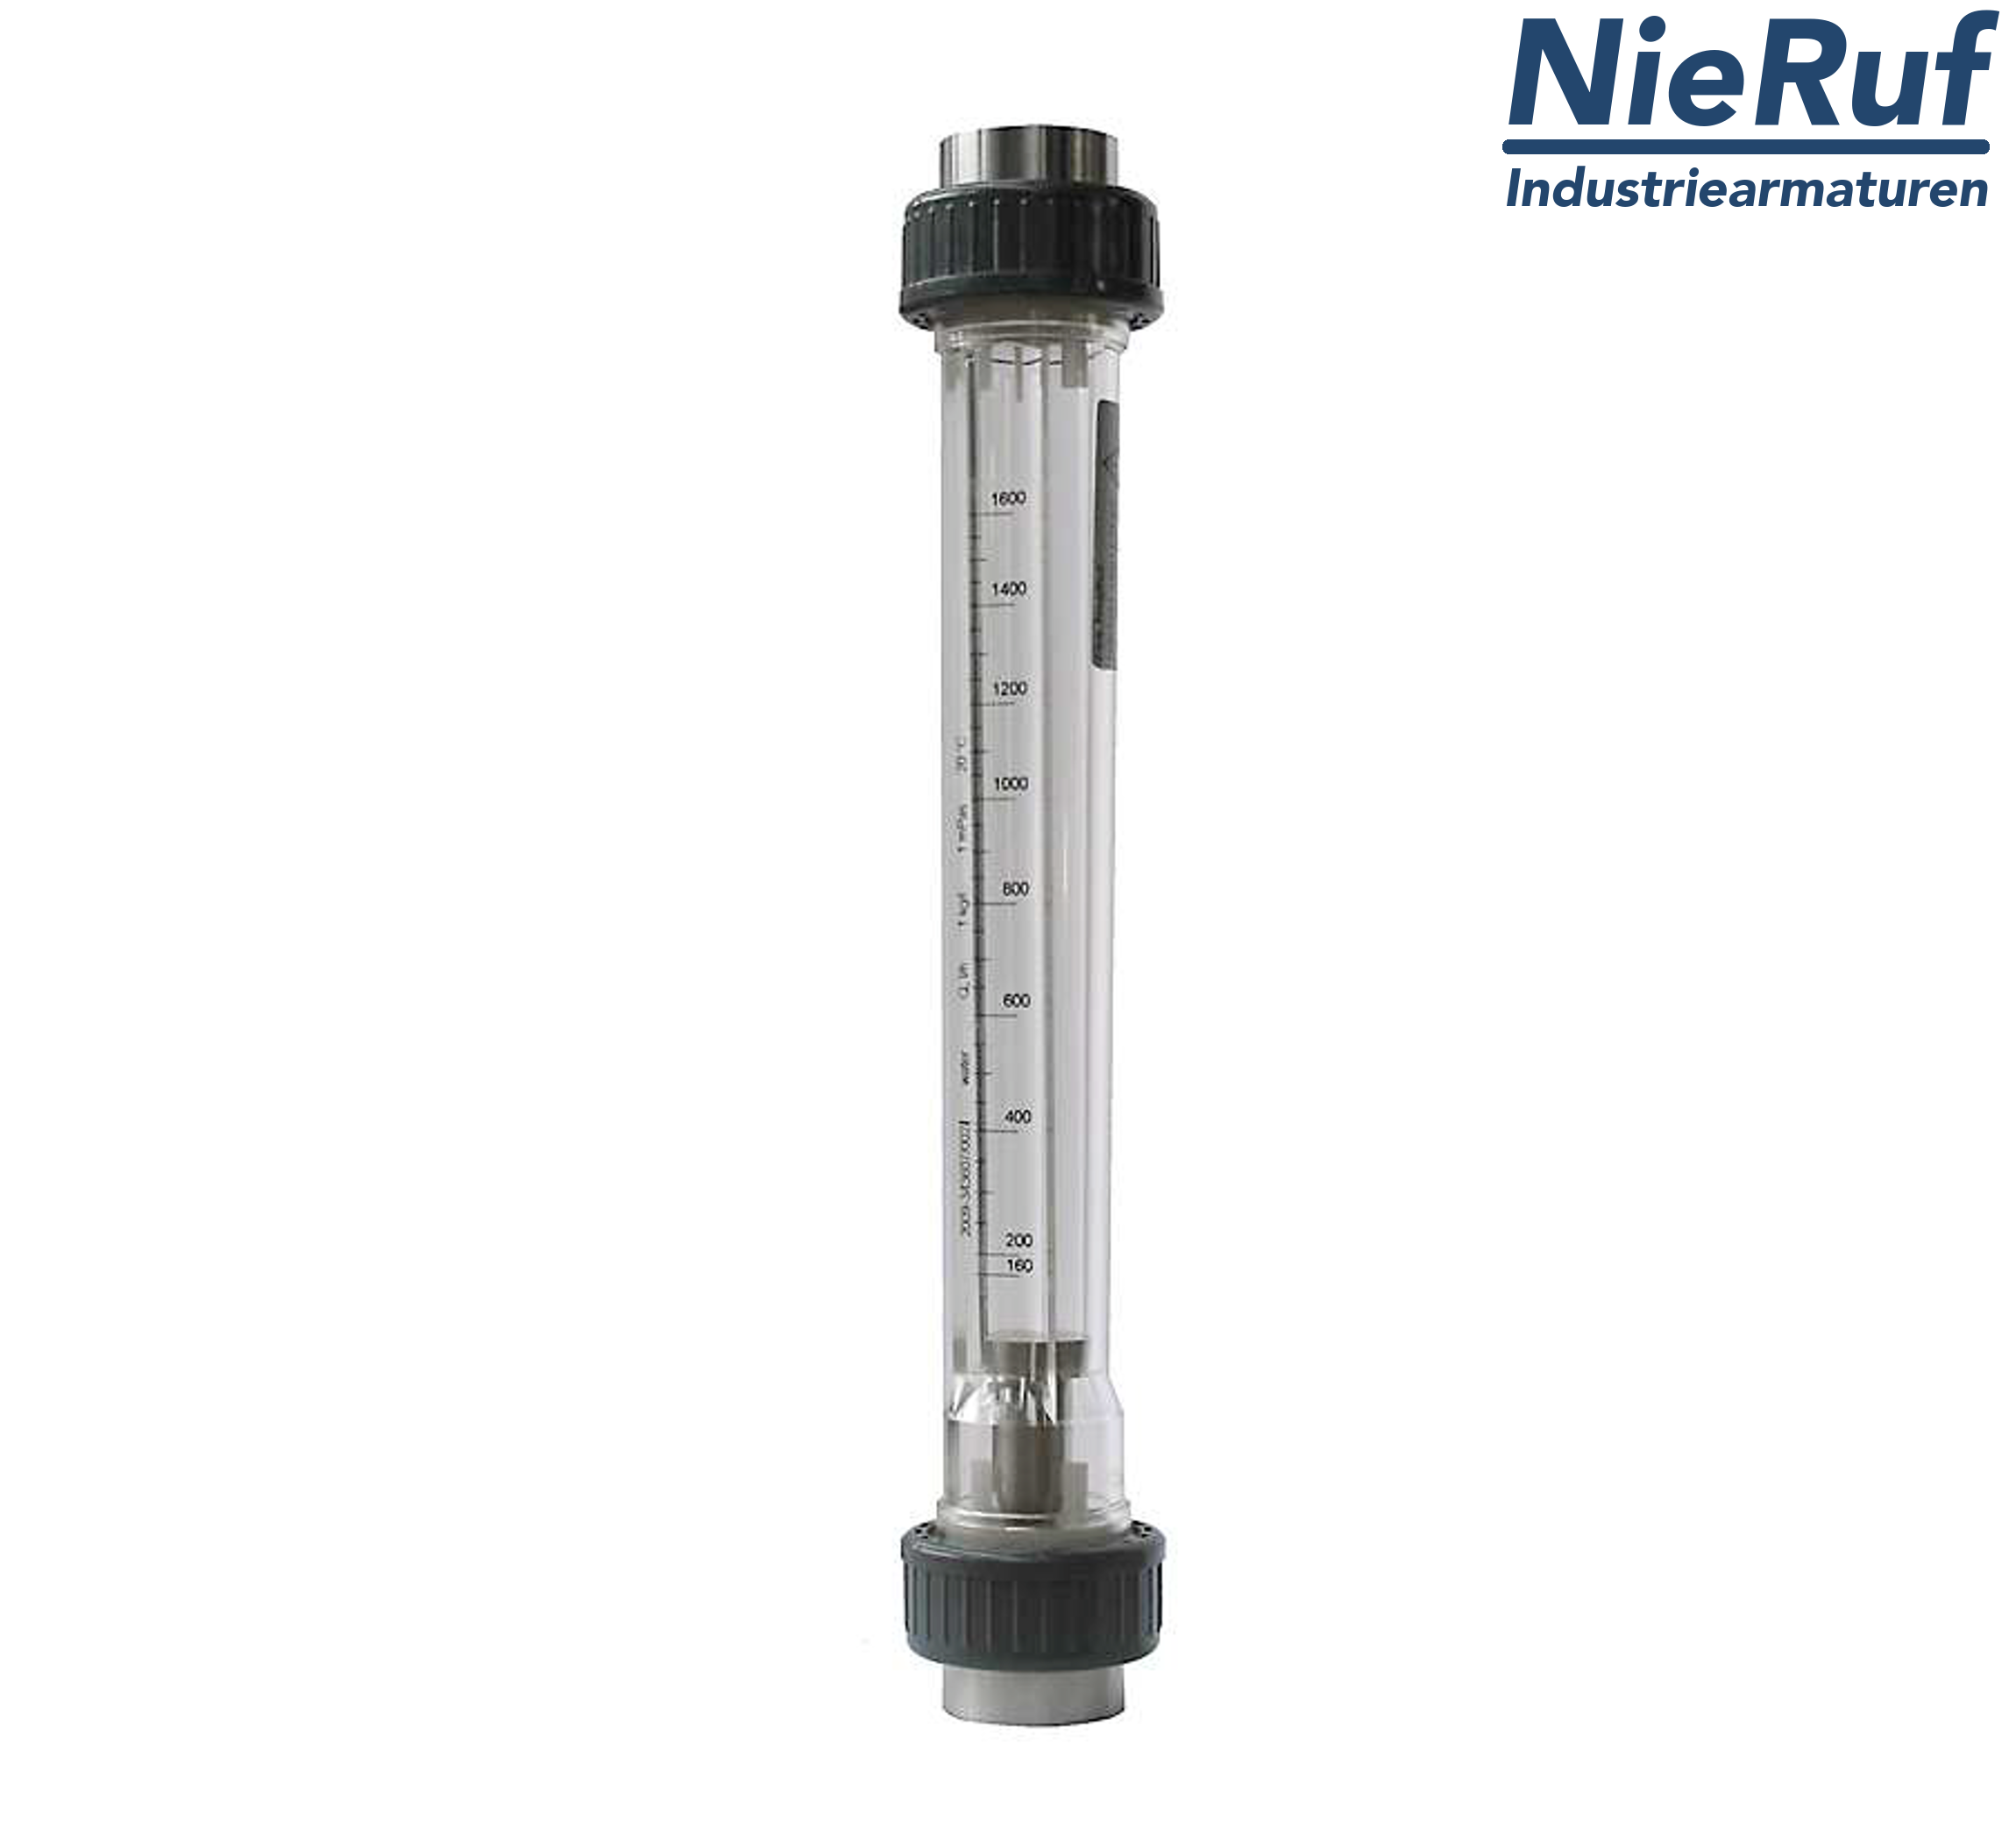 Variable area flowmeter 1" inch 250.0 - 2500 l/h water NBR